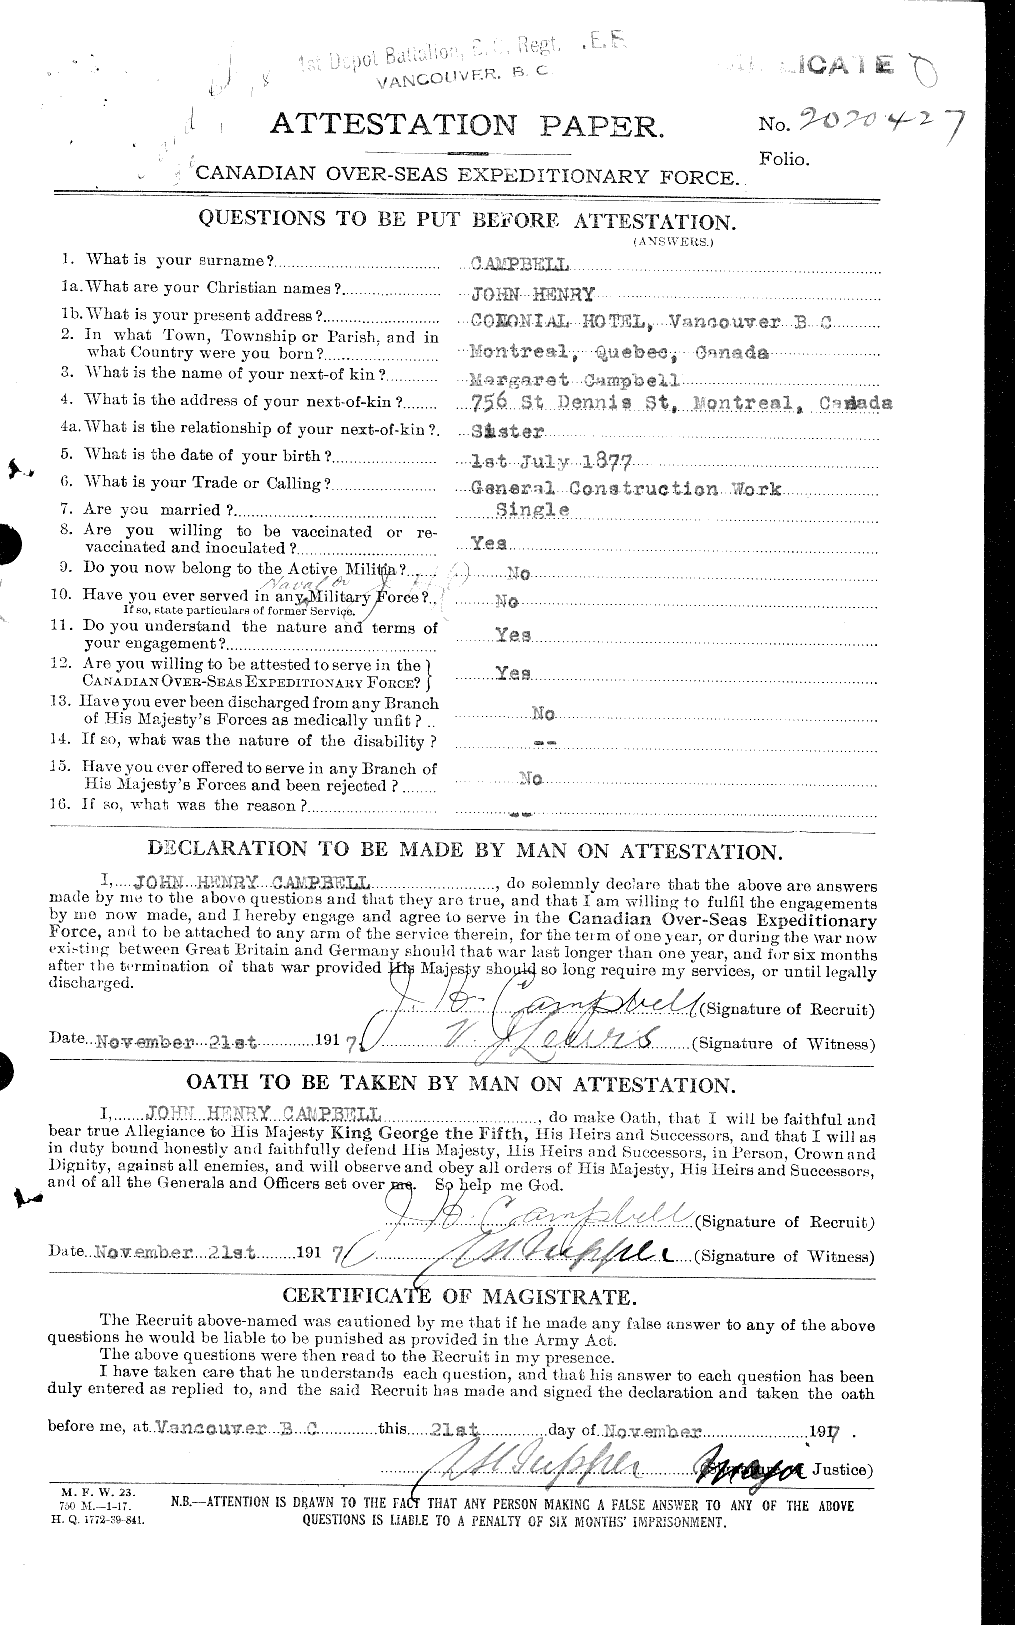 Personnel Records of the First World War - CEF 008534a